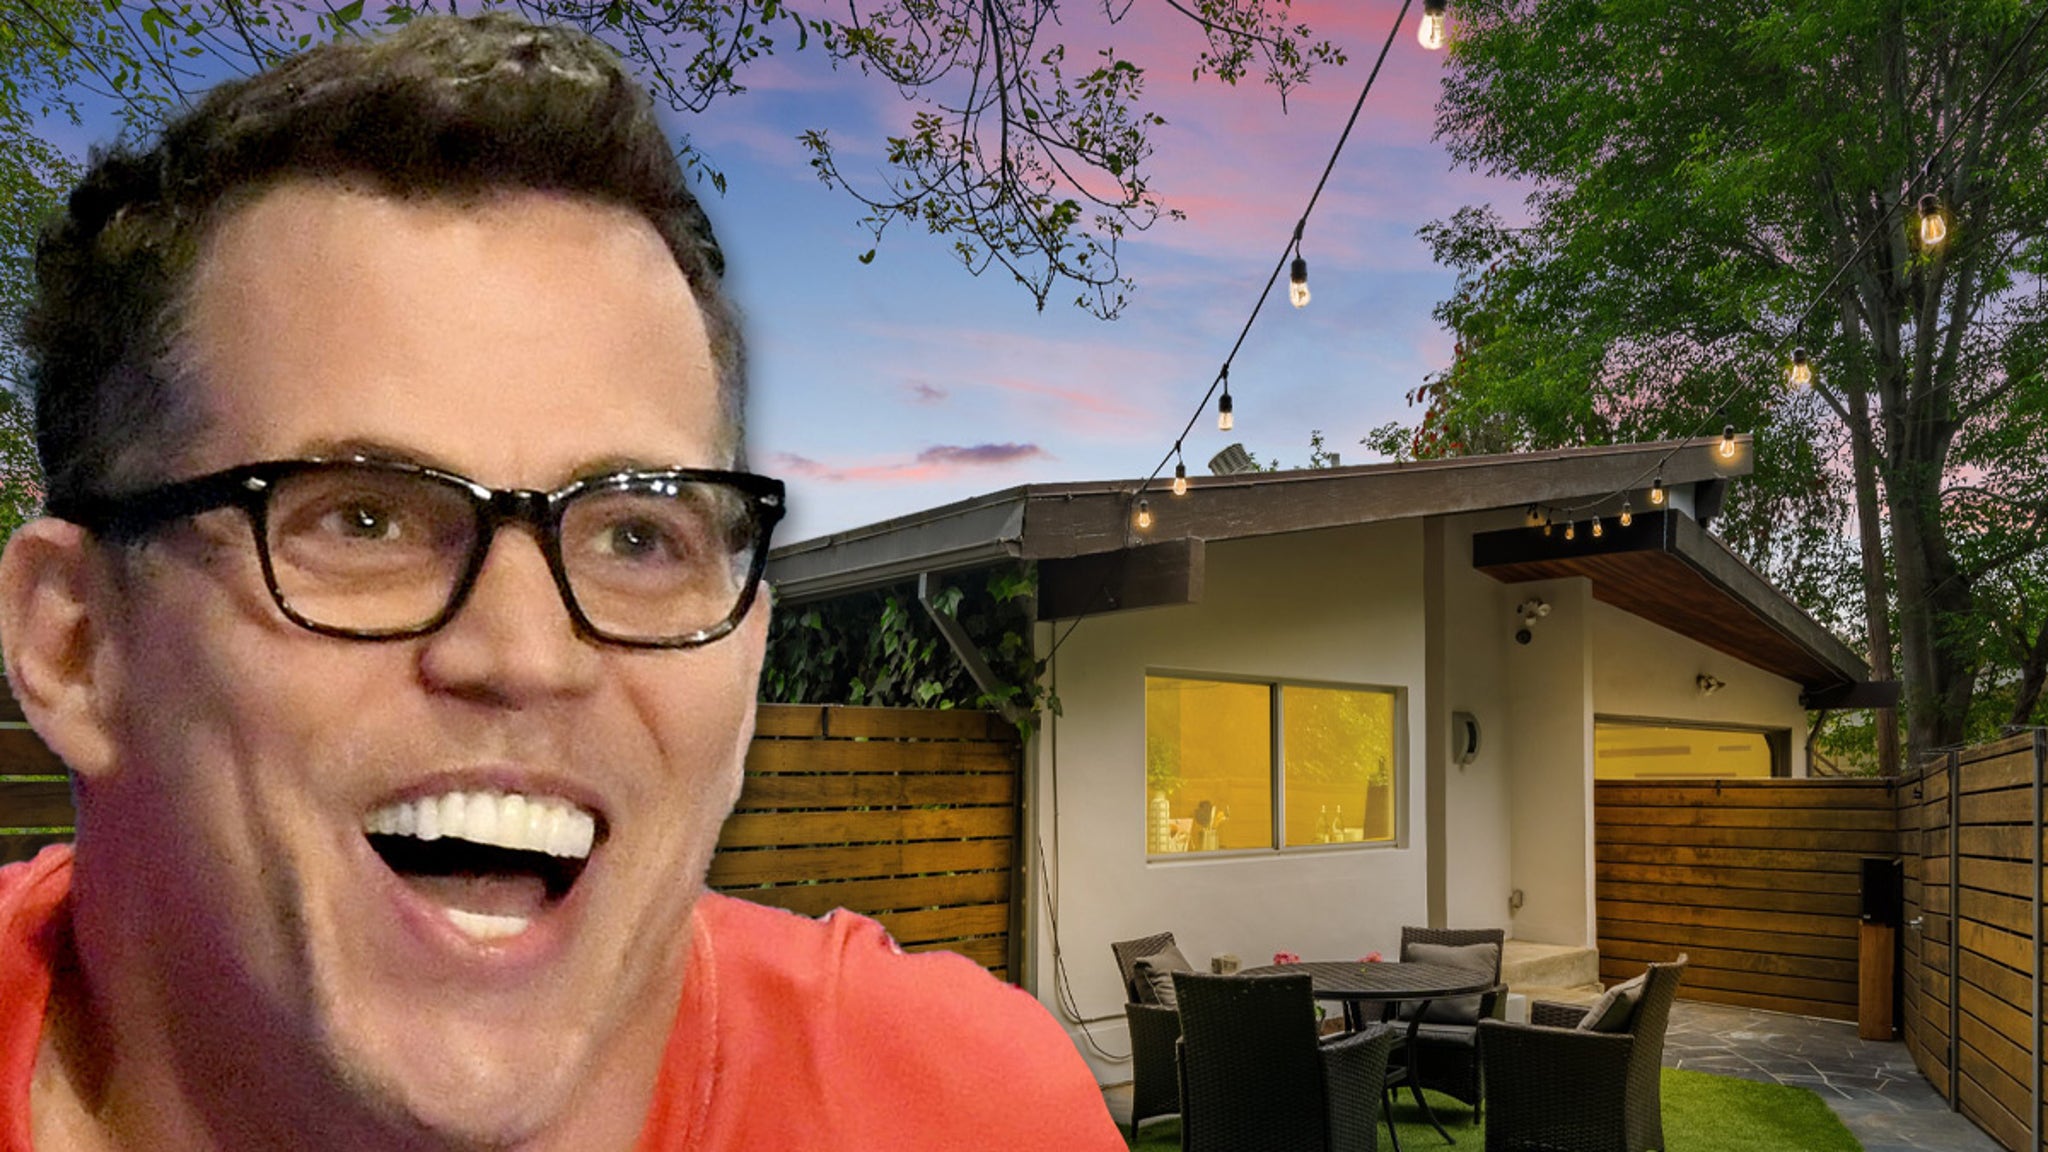 Steve-O Puts L.A. Home Up for Sale As He Prepares Move to Tennessee